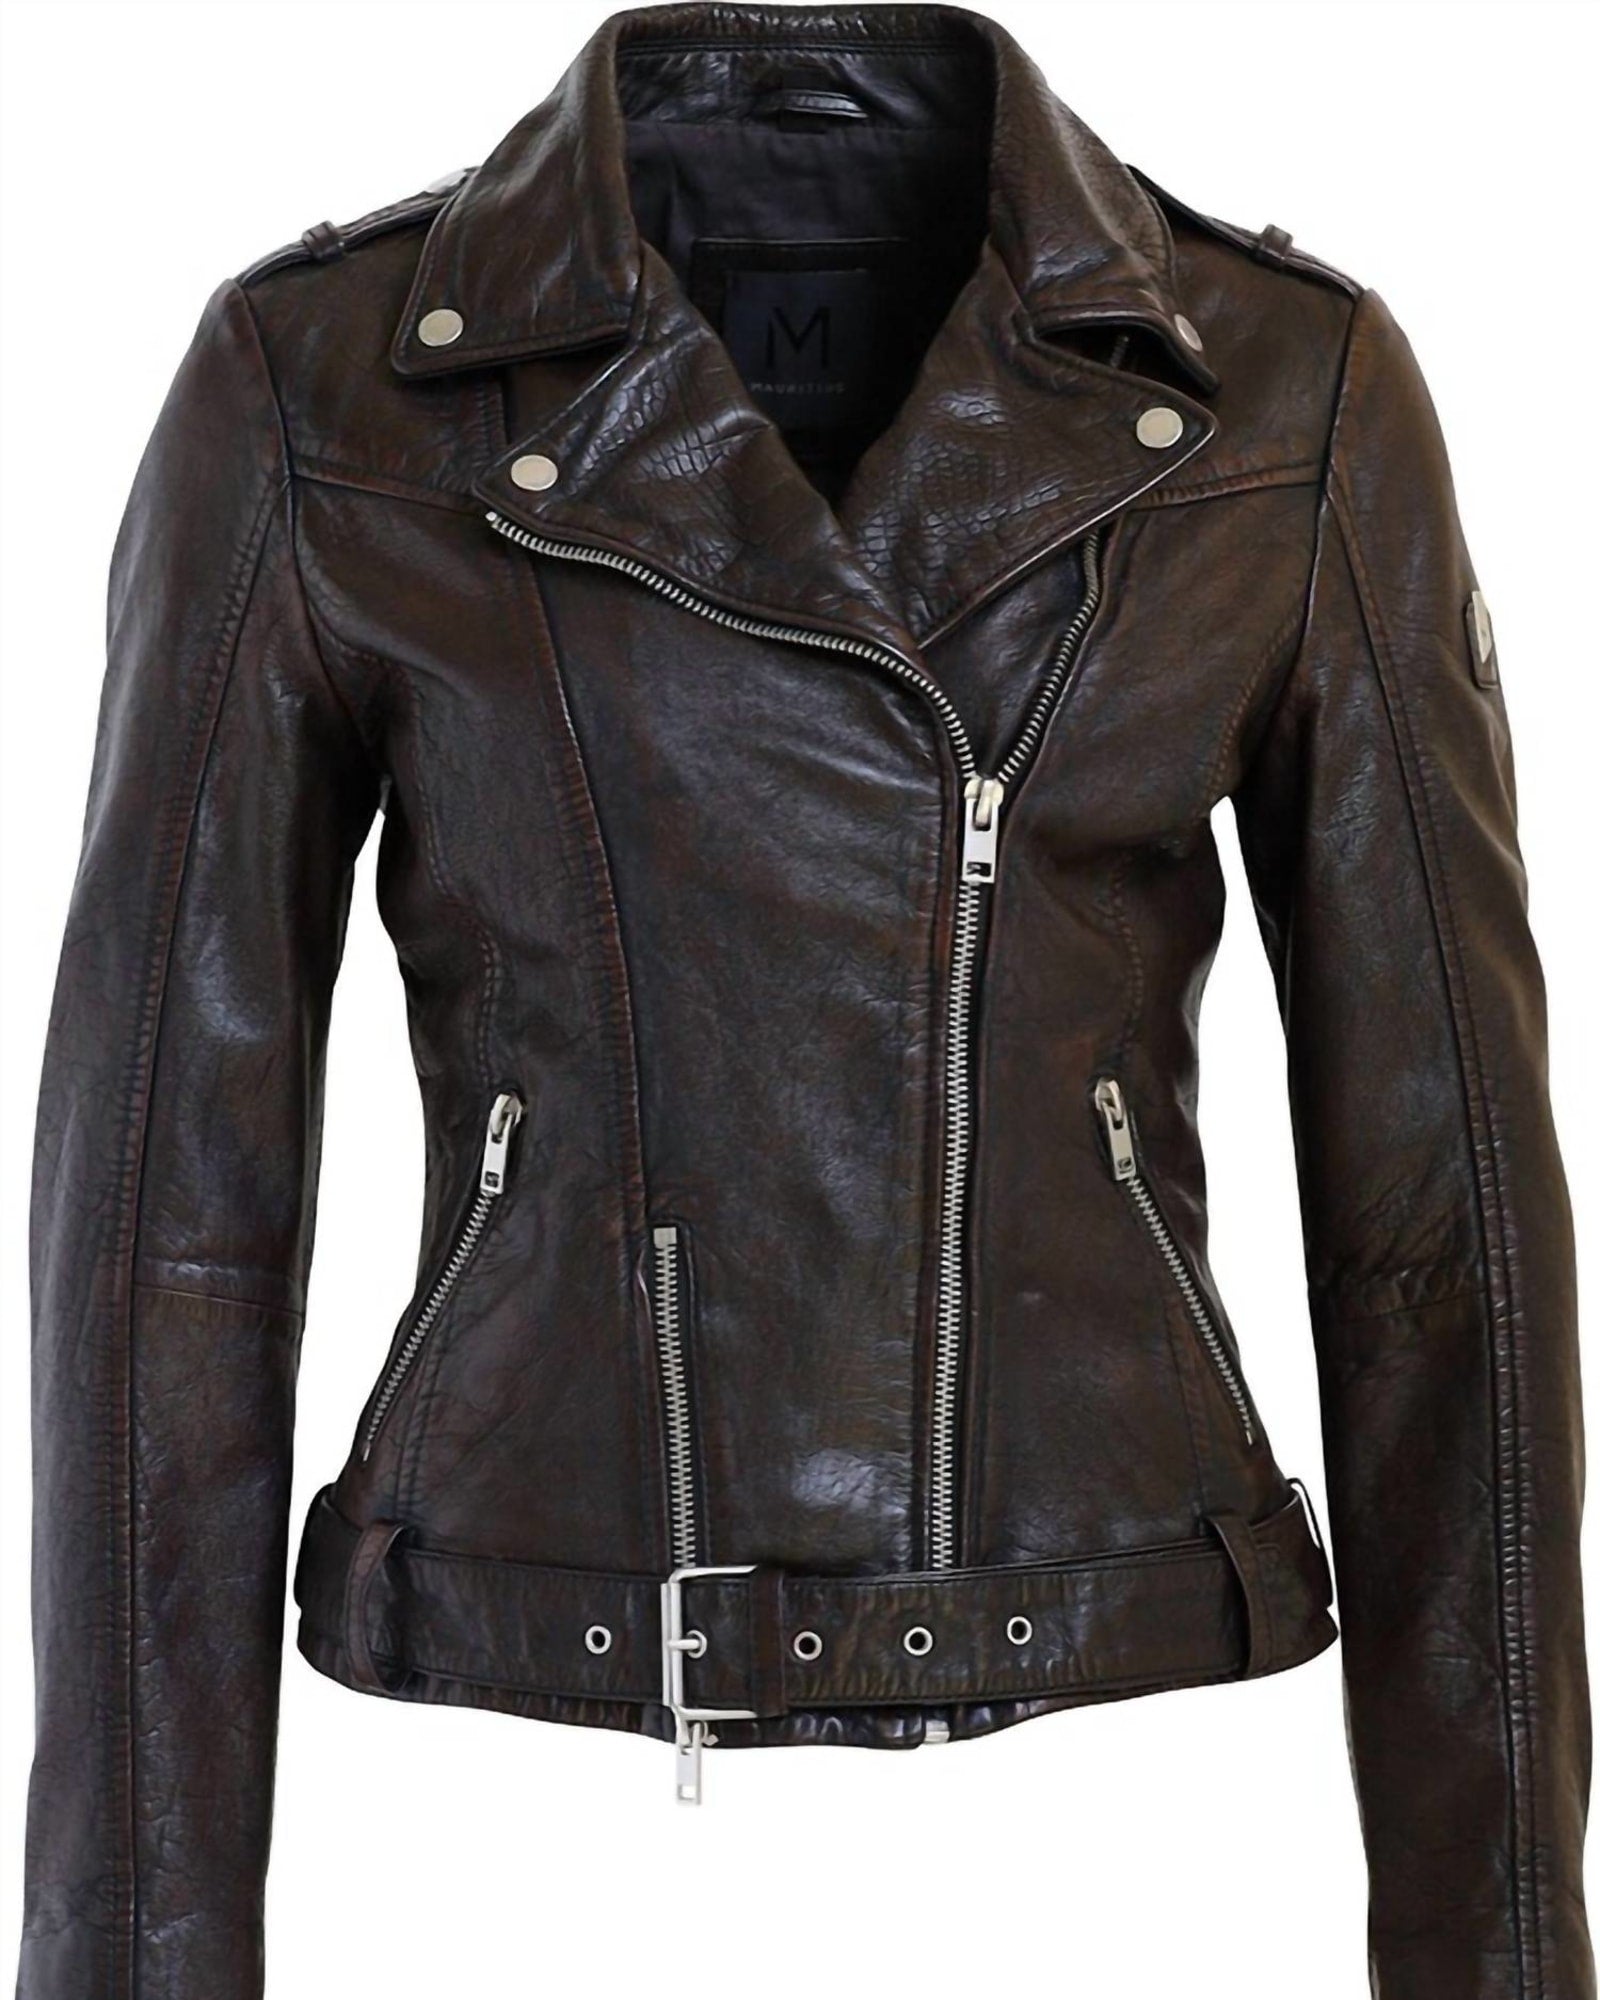 Leather Jacket For Curvy Women